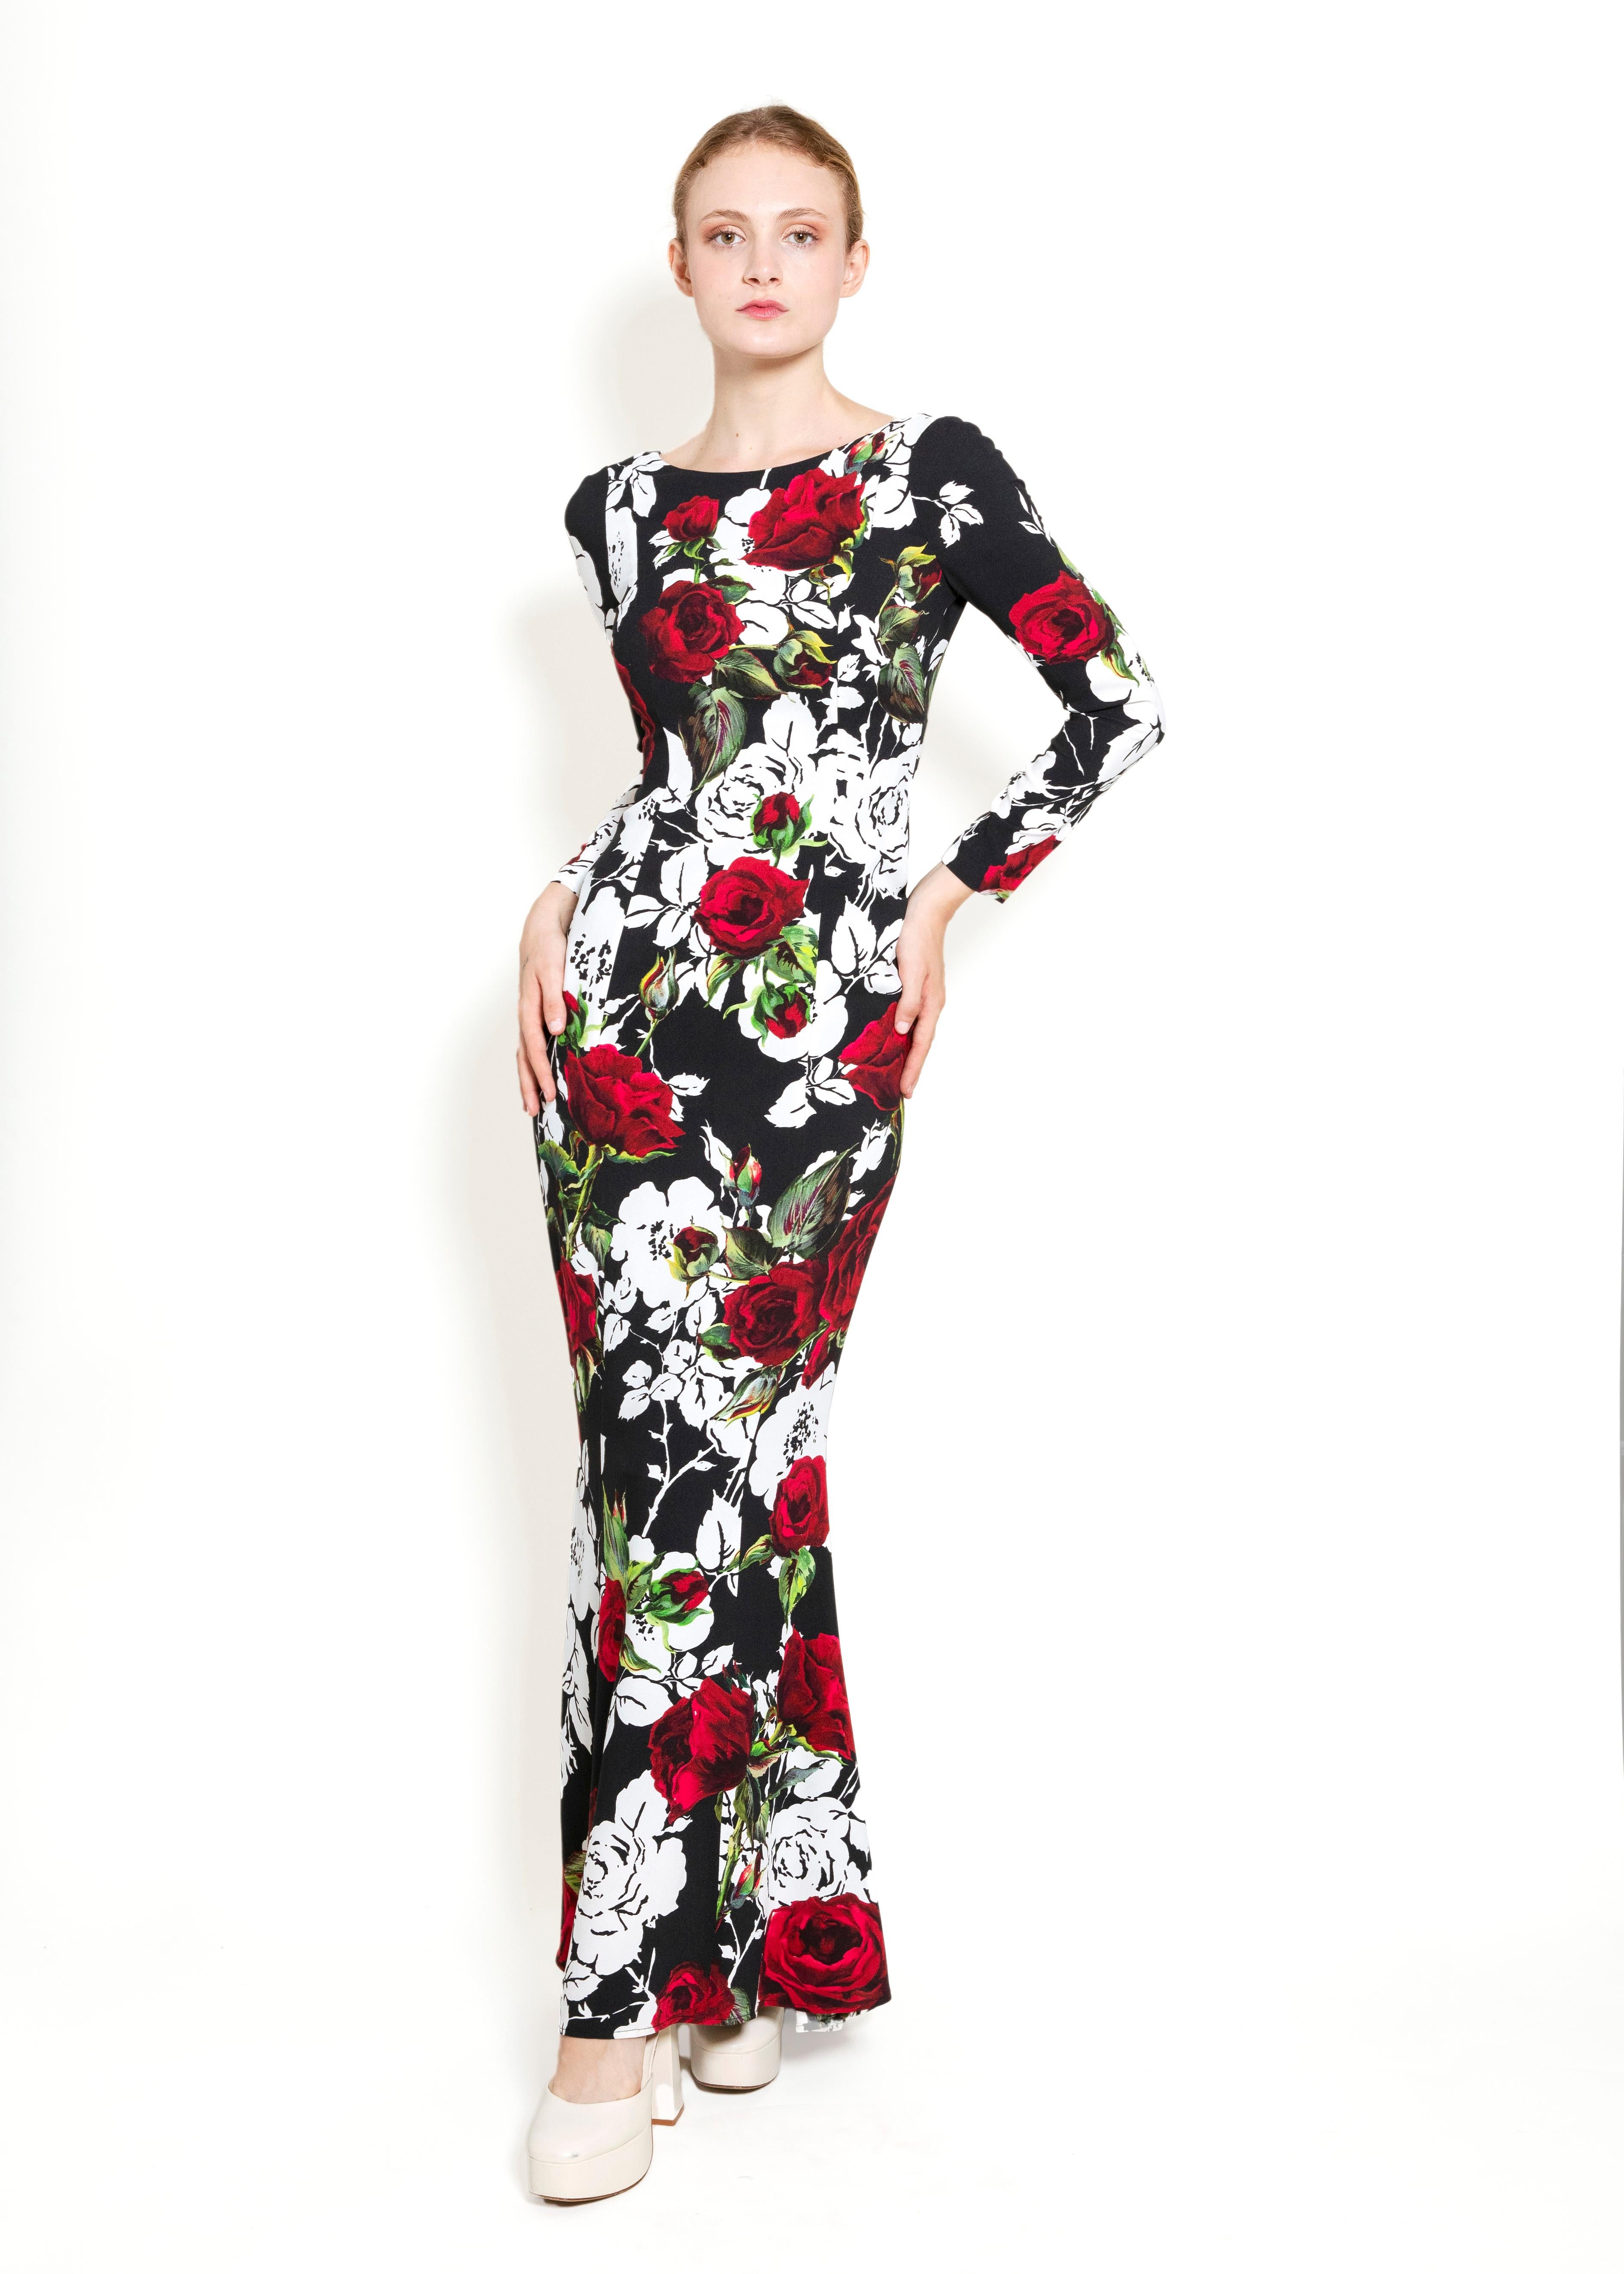 Experience a world of luxury with the Dolce & Gabbana Fall 2015 L/S Floral Dress. Crafted from exquisite fabrics to showcase a stunning mermaid silhouette, this unique floral dress is sure to dazzle and delight. Elevate your wardrobe with this